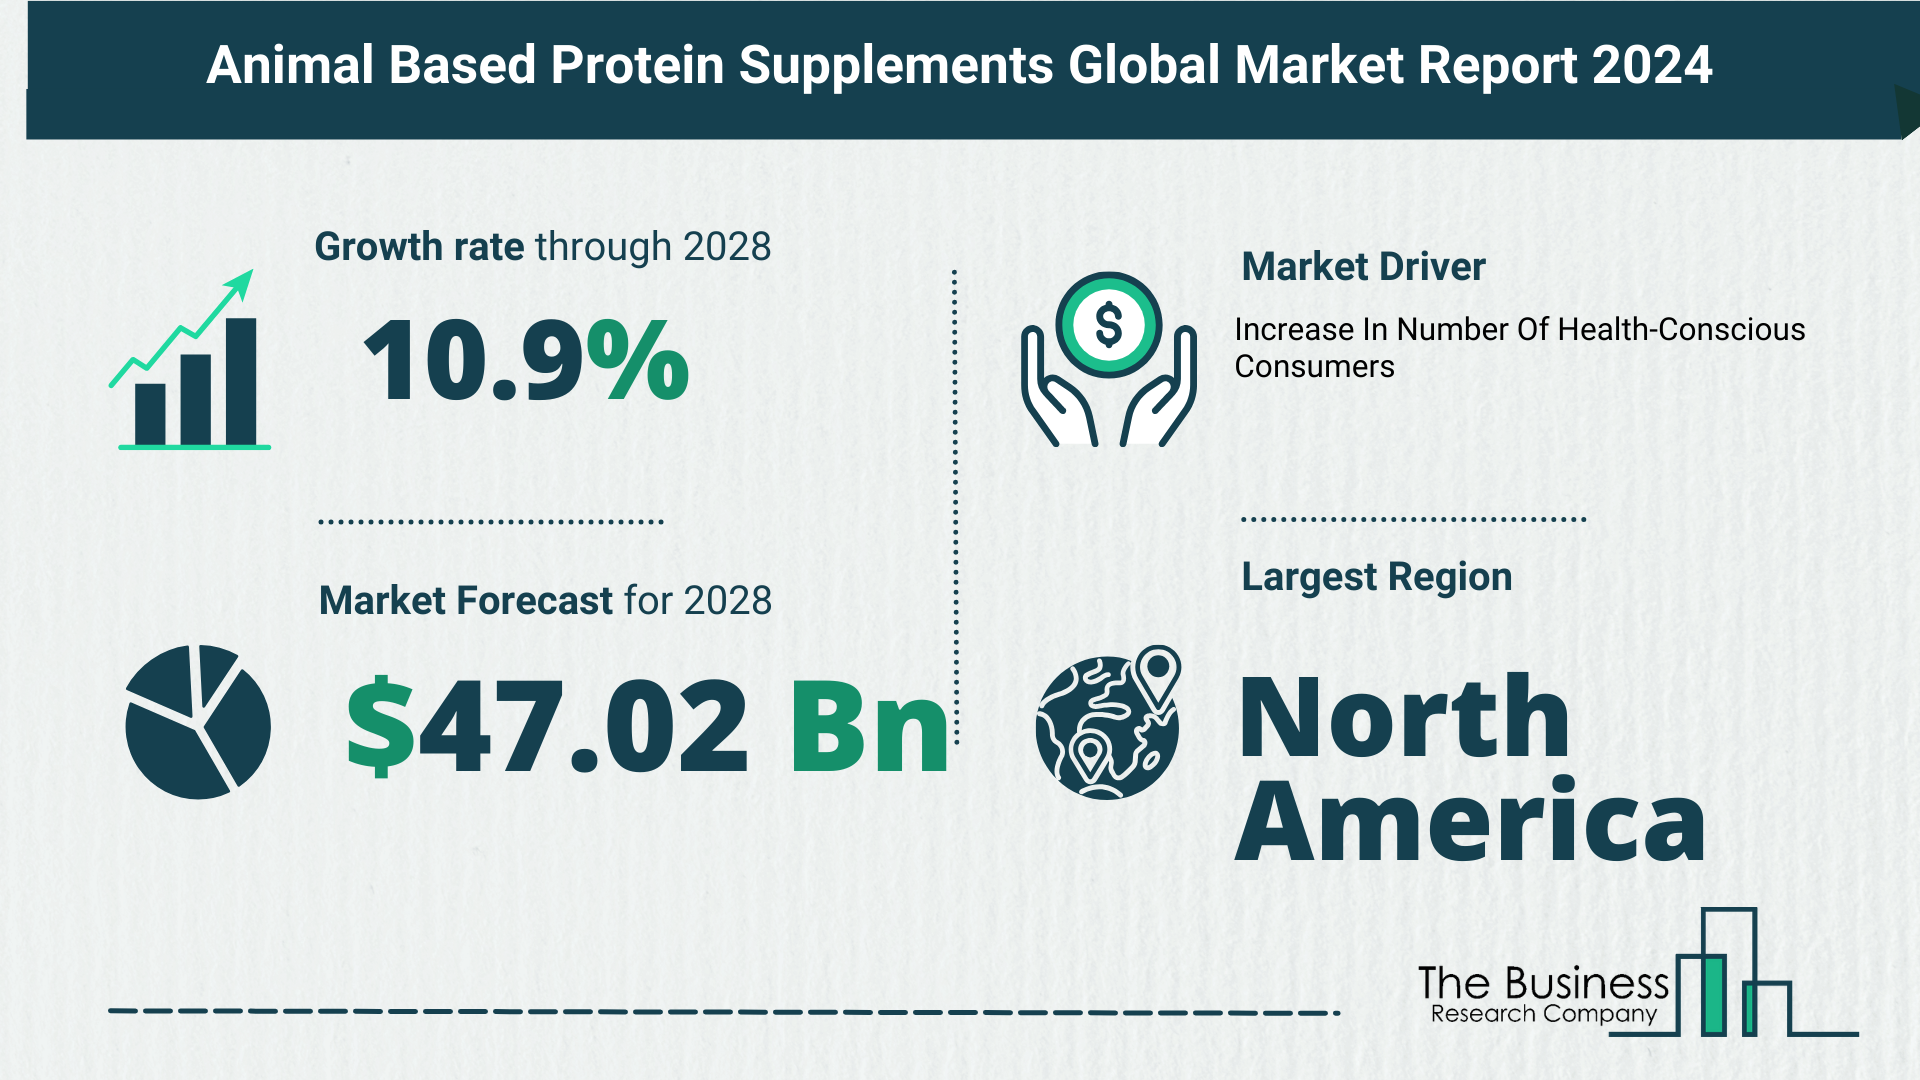 How Is The Animal Based Protein Supplements Market Expected To Grow Through 2024-2033